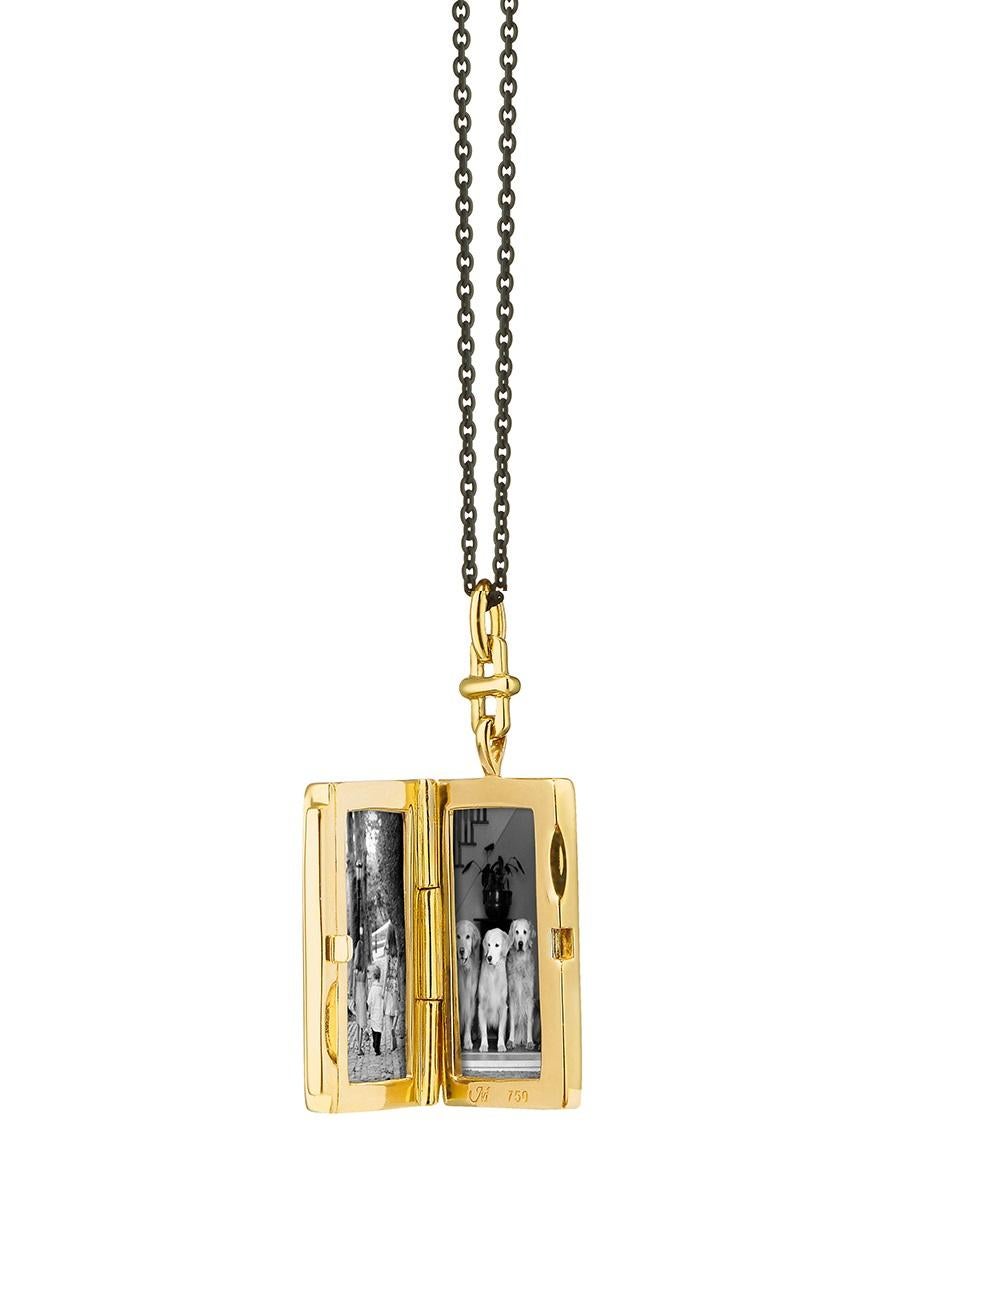 This modern Monica Rich Kosann deco inspired 18K Yellow Gold rectangular locket features a decorative bridle bail. It holds two photos and is presented on a 32” black steel chain for a contemporary yet classic finish. Fill your locket with your